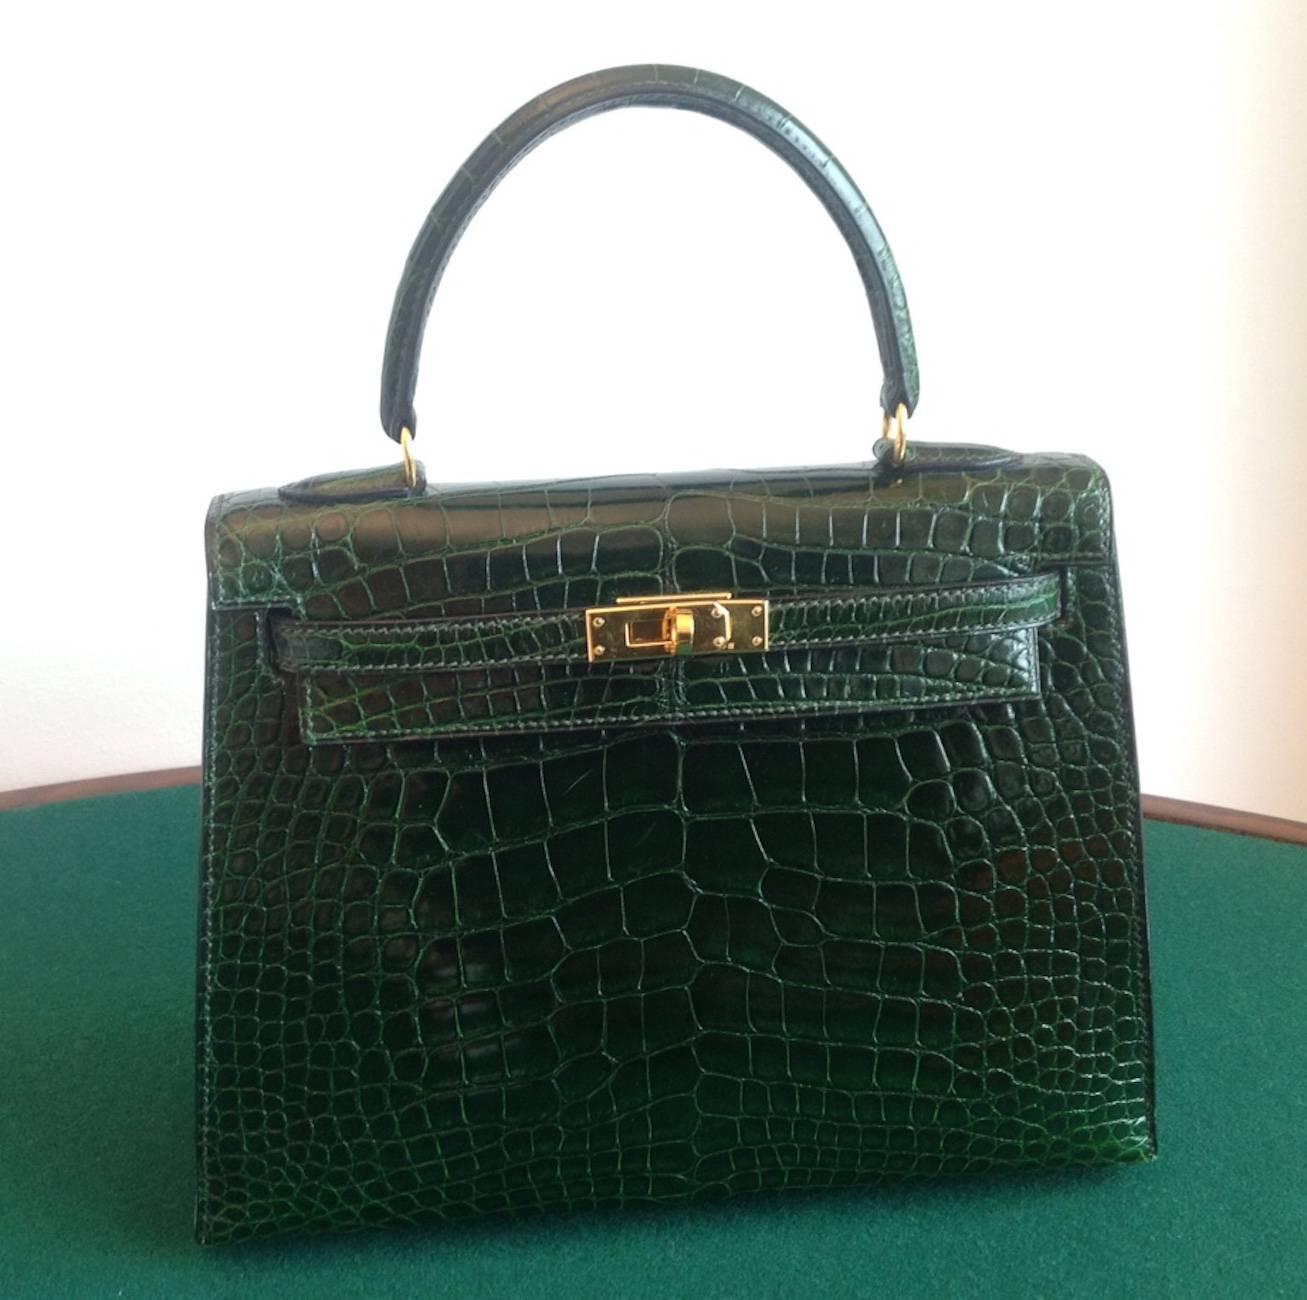 Hermes 25 cm shiny Vert Fonce alligator sellier kelly bag, very rare and beautifull in this size with gold hardware
B in a square  stamp, 1998 key fob and Padlock, removable Shoulder strap.
Very good general condition.
The bag has been used few